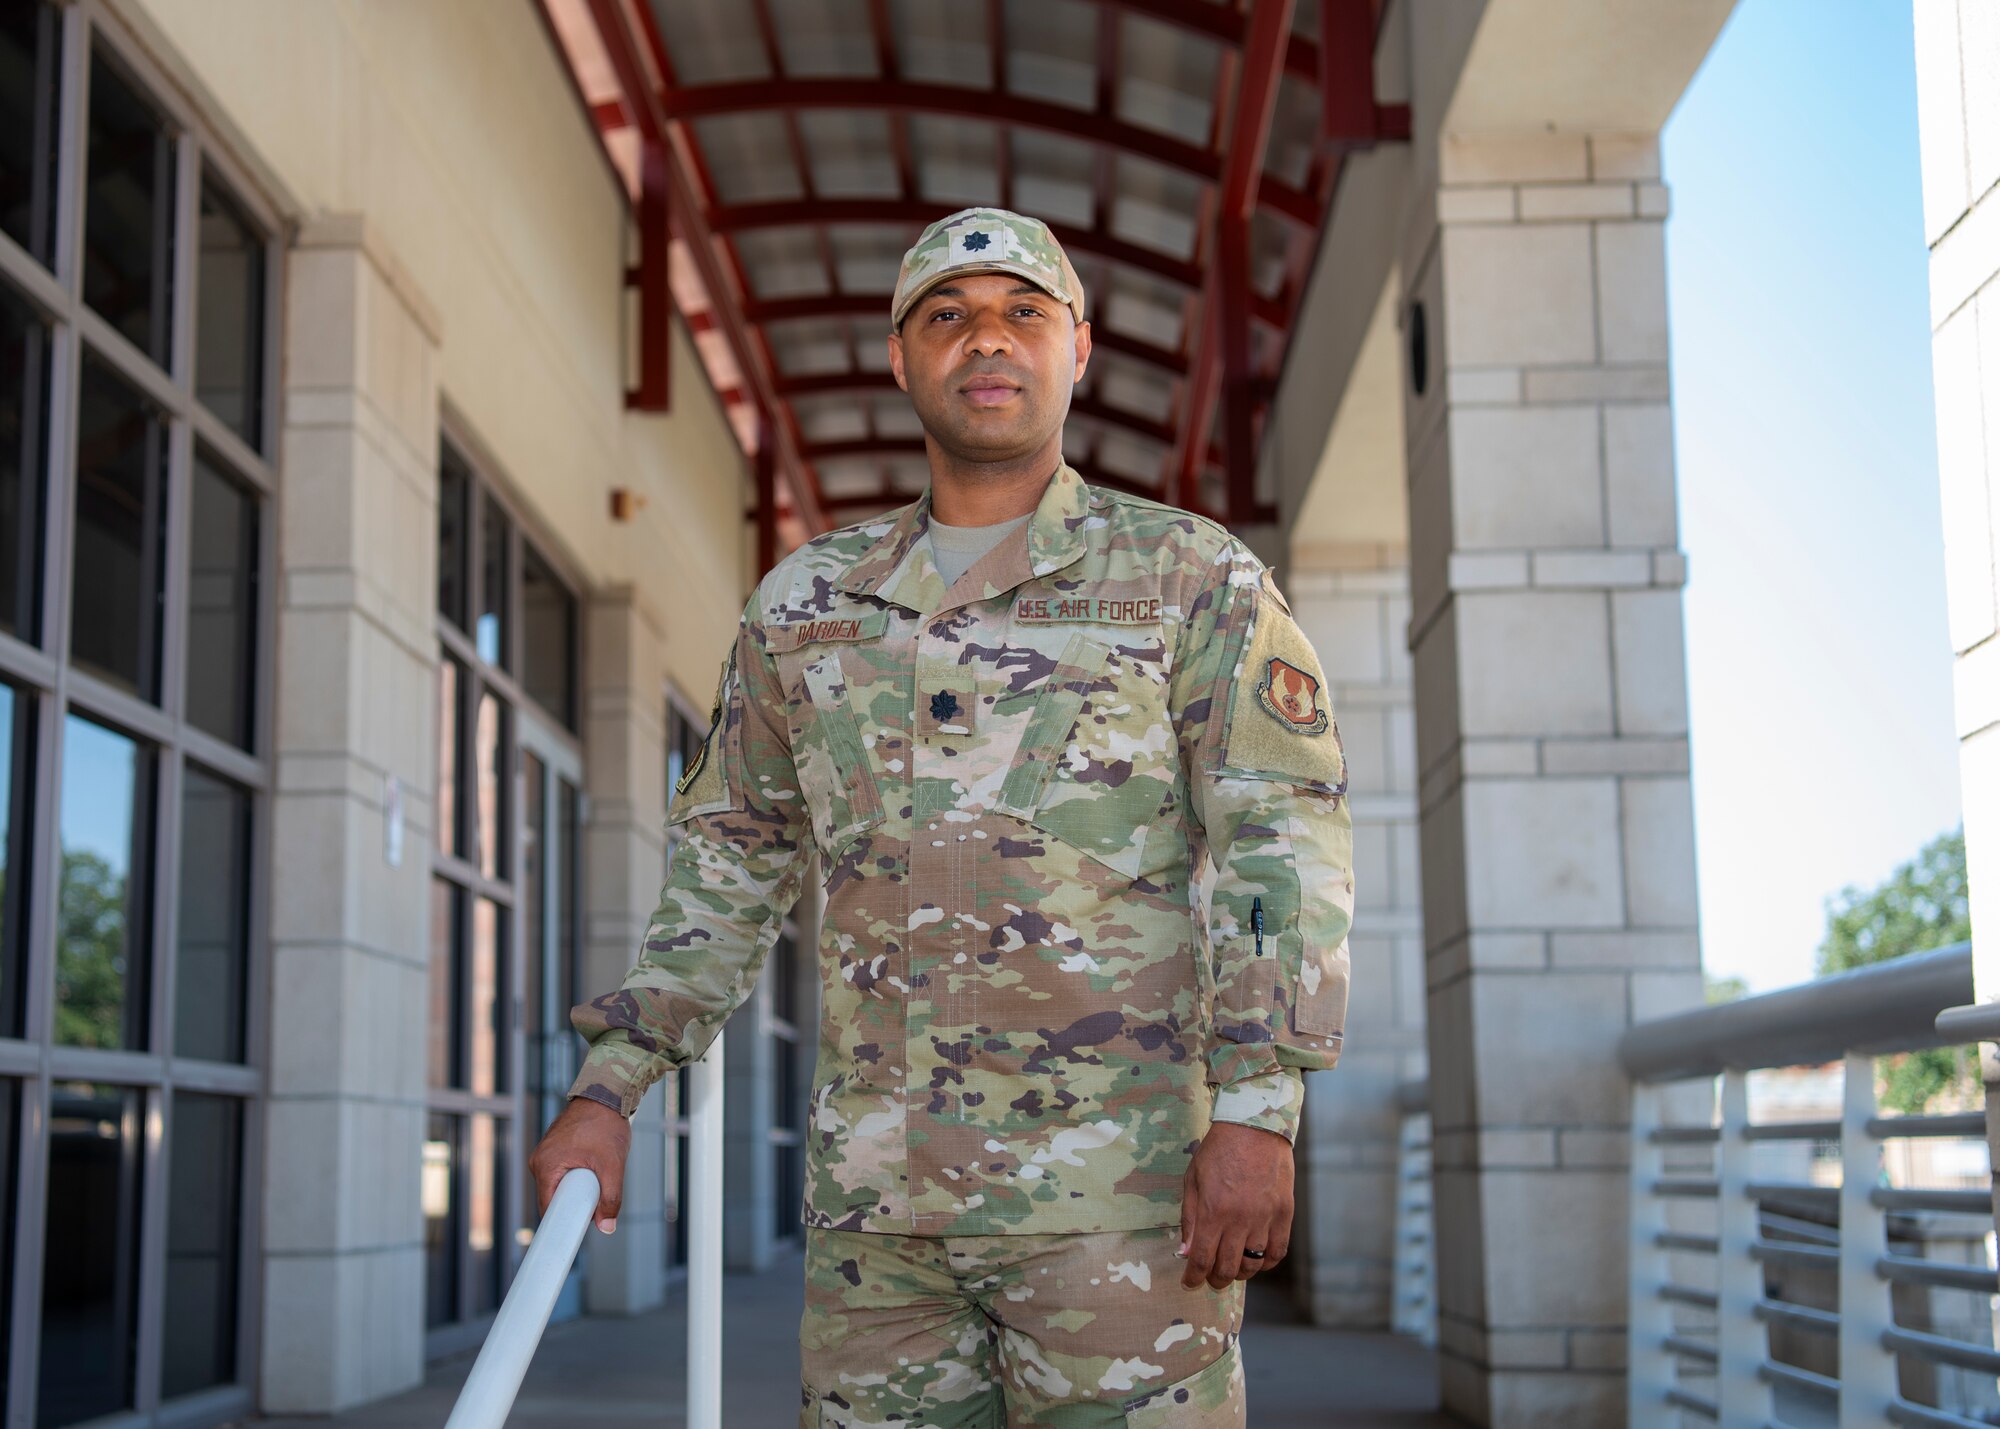 Photo of Darden in his Air Force utility uniform outside of the building